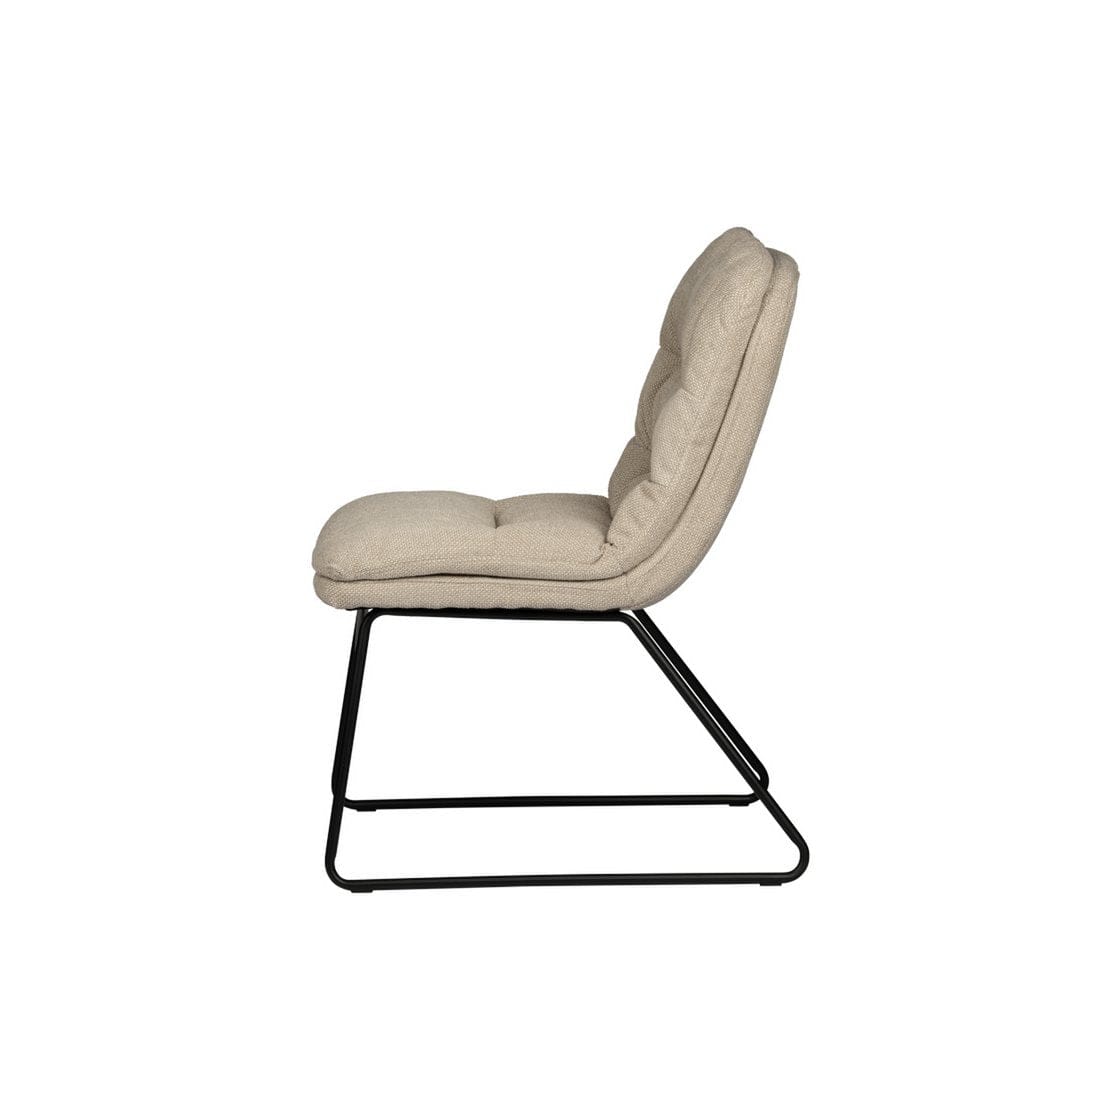 Pole To Pole Beluga chair Beige (Set of 2)